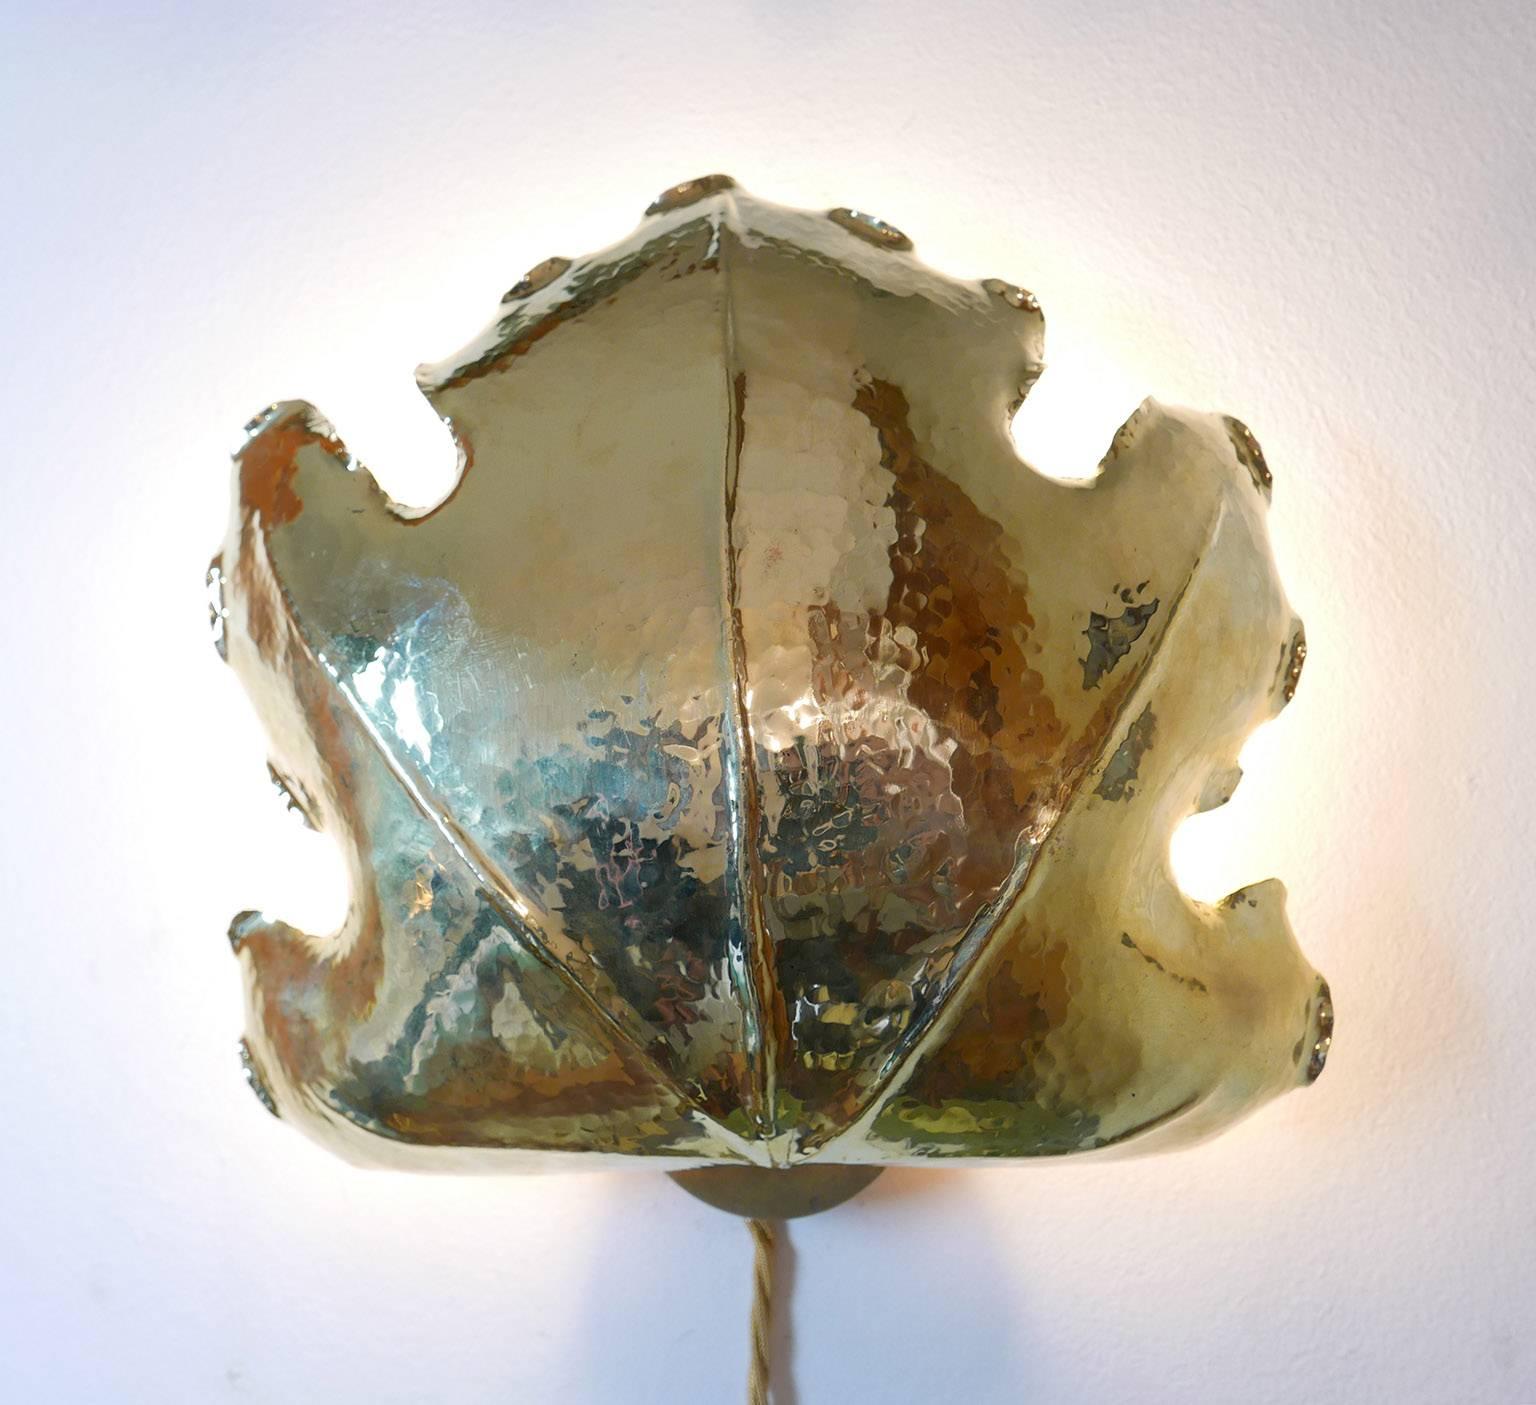 Brass wall lamp, with hummered surface. 
Attribuited to Botega Gadda in Milano.